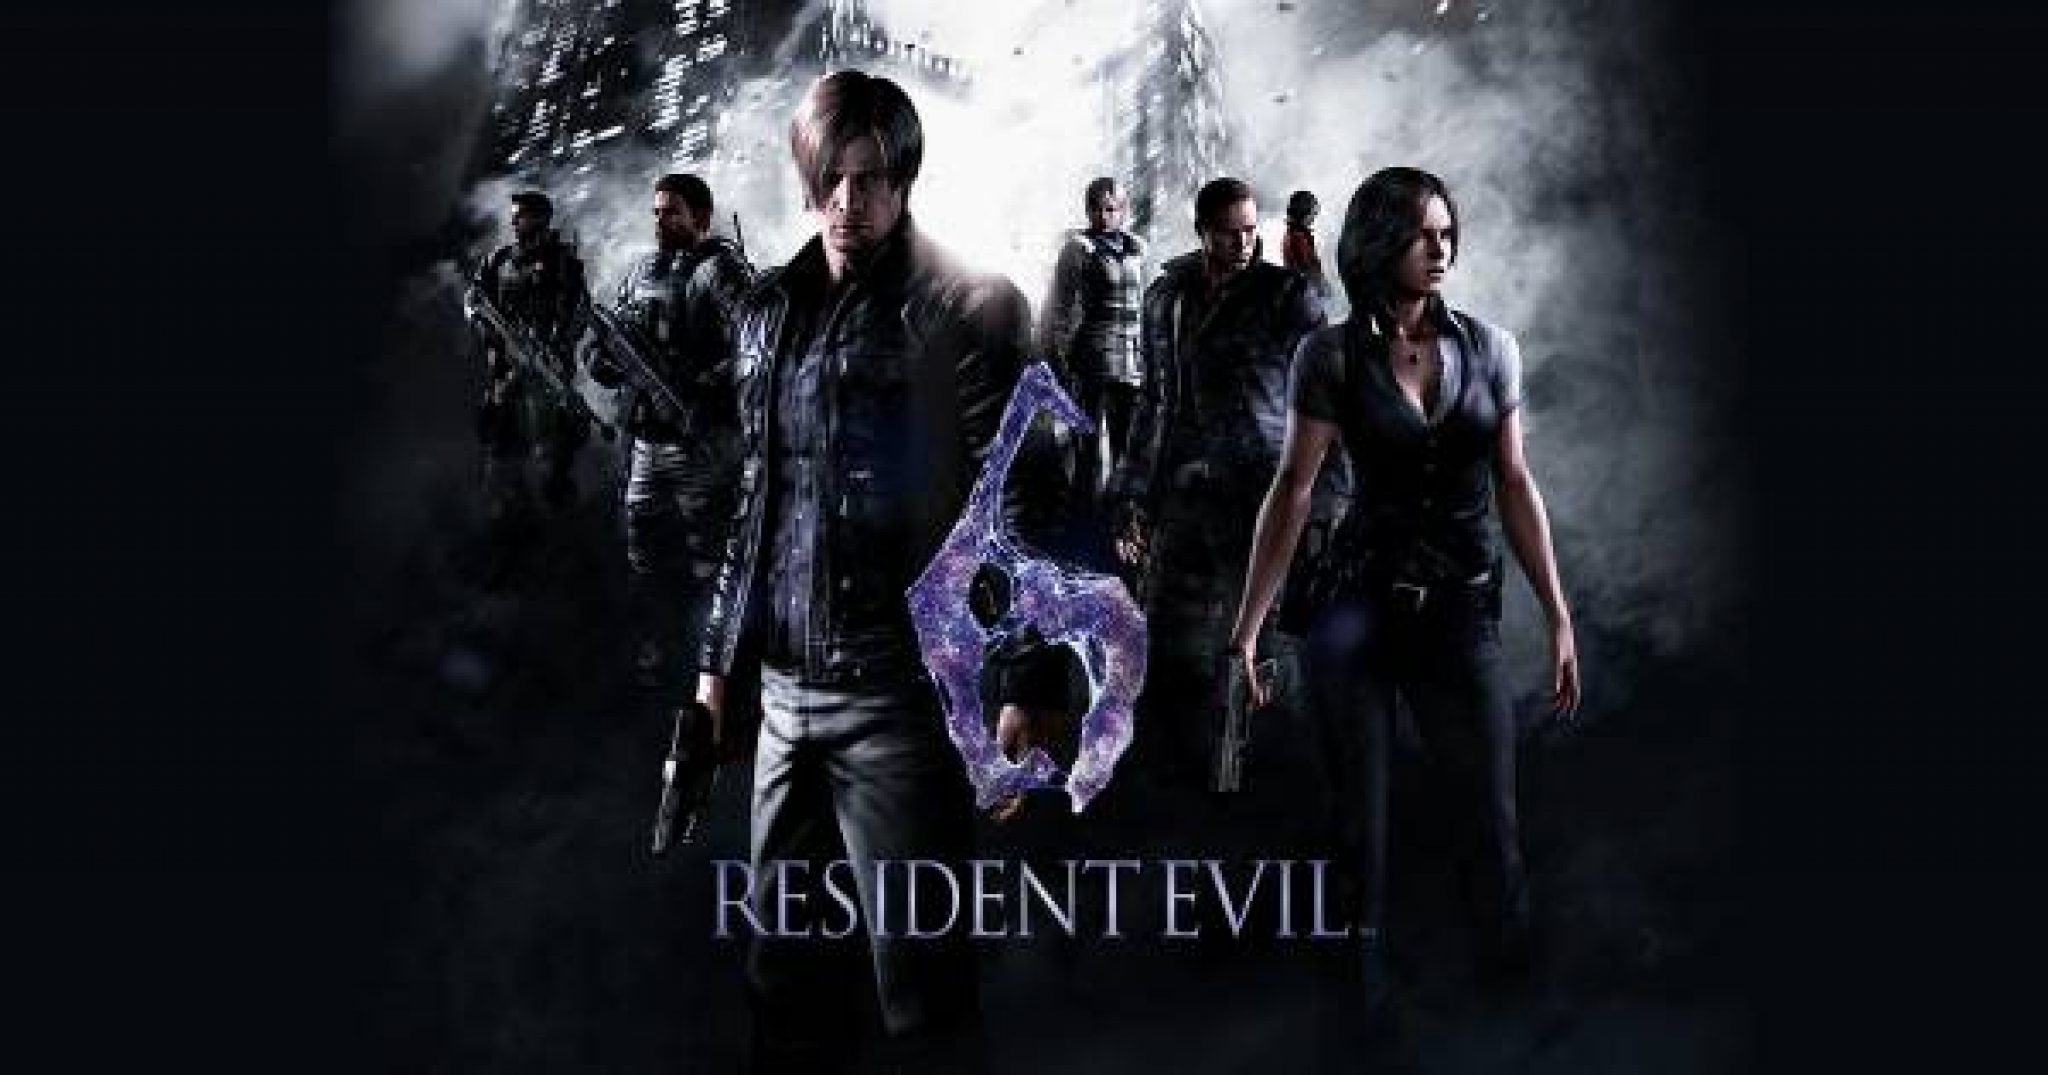 download resident evil 4 pc highly compressed 10mb